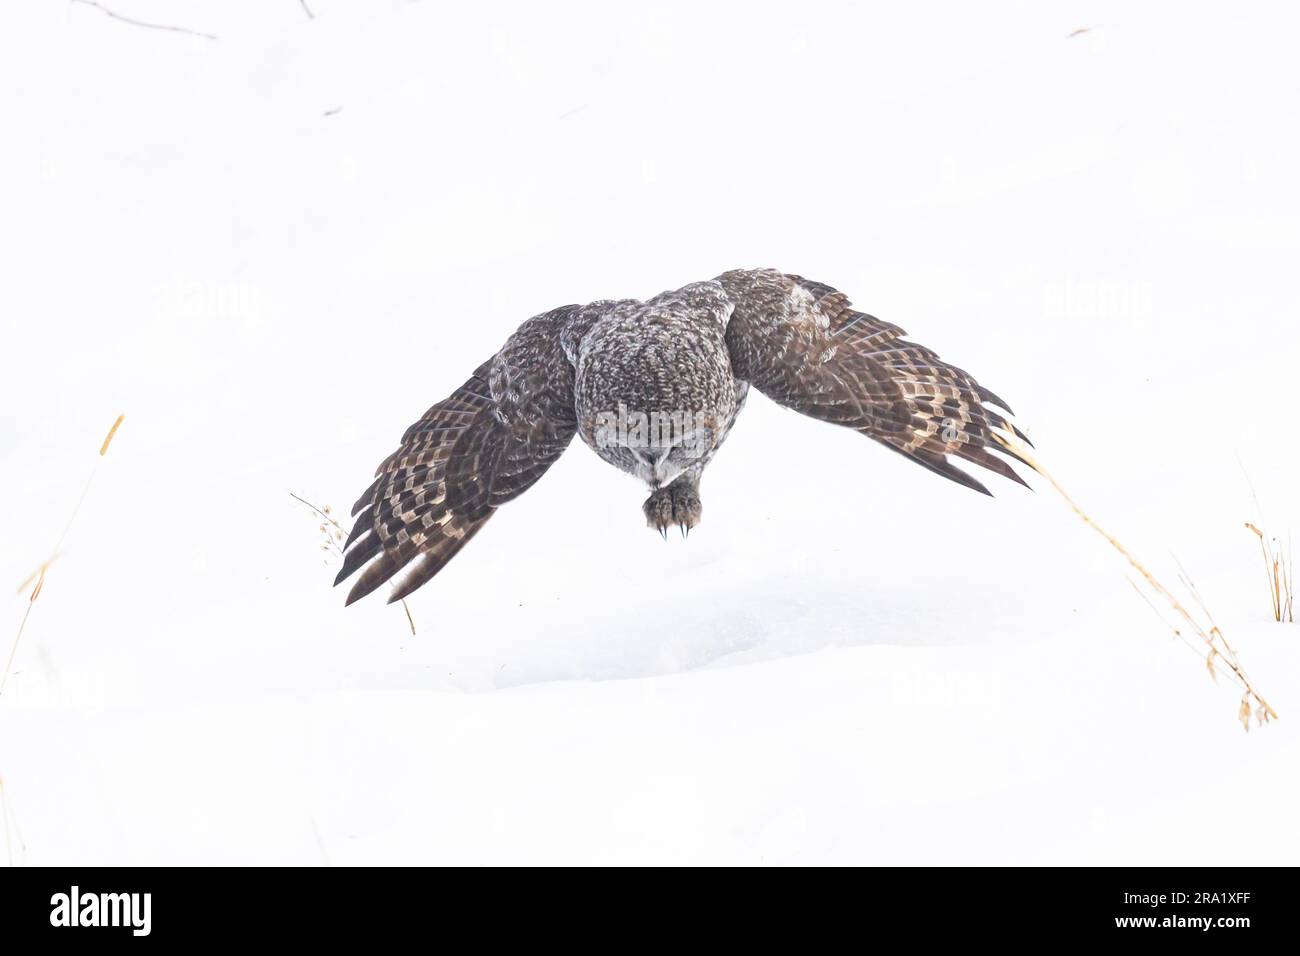 A great gray owl about to punch through the snow after prey in the snow of Bragg Creek Stock Photo